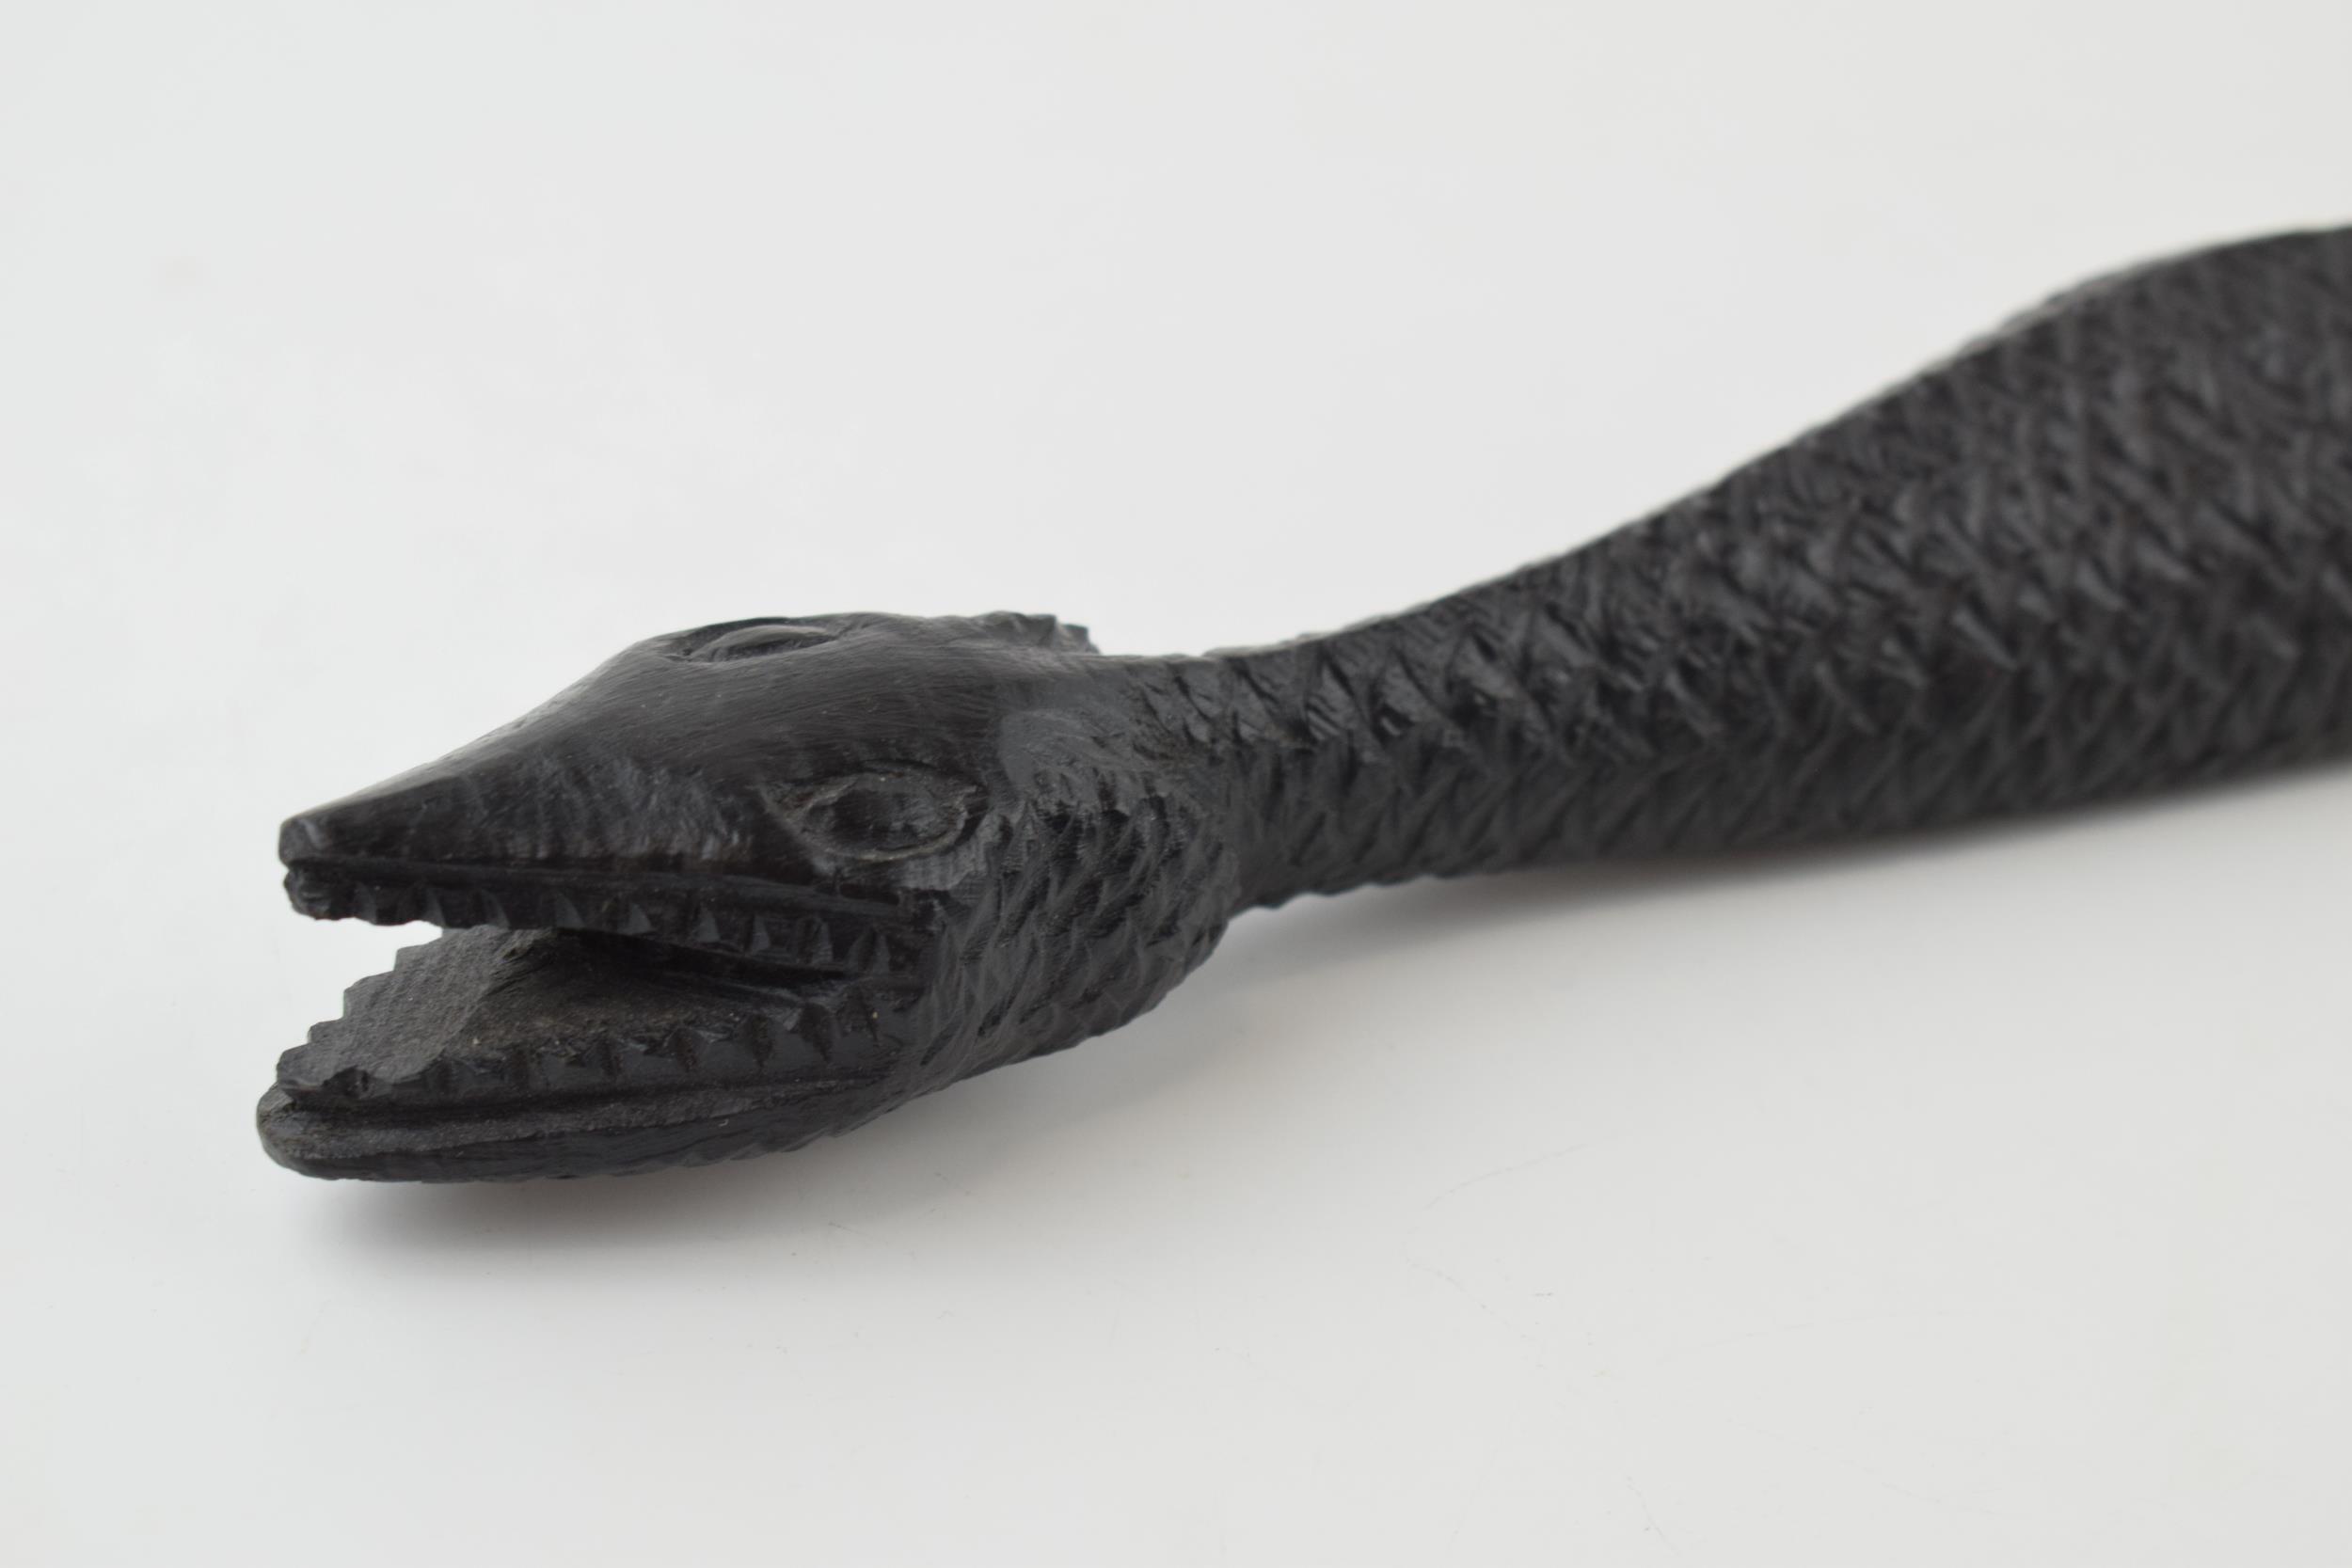 Hand-carved snake ornament in hardwood, likely early 20th century. Length 56cm. - Image 2 of 3